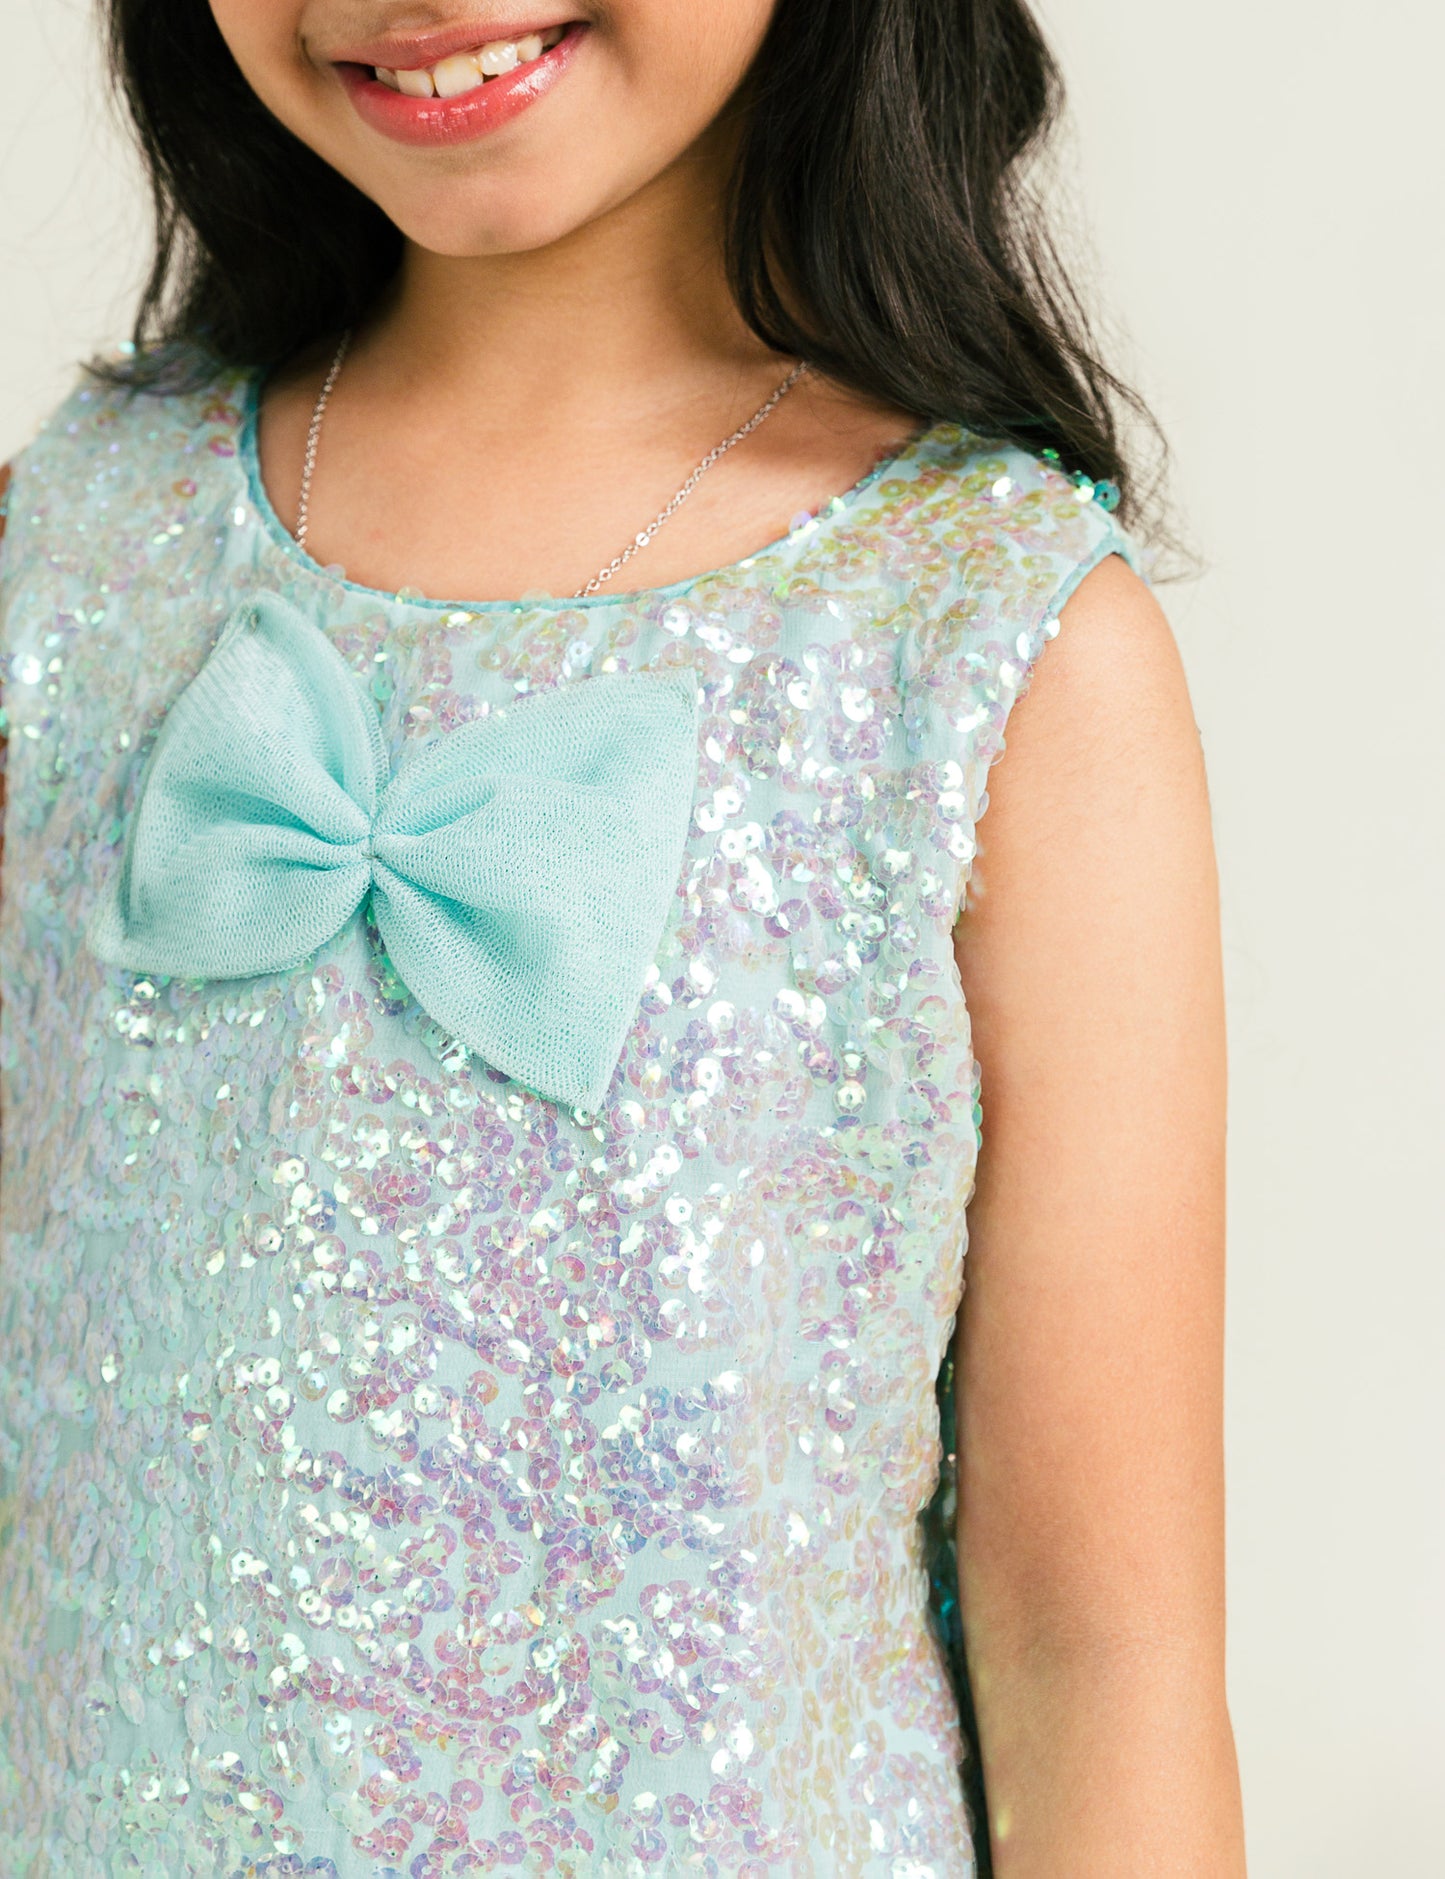 FRILL SEQUIN PARTY DRESS